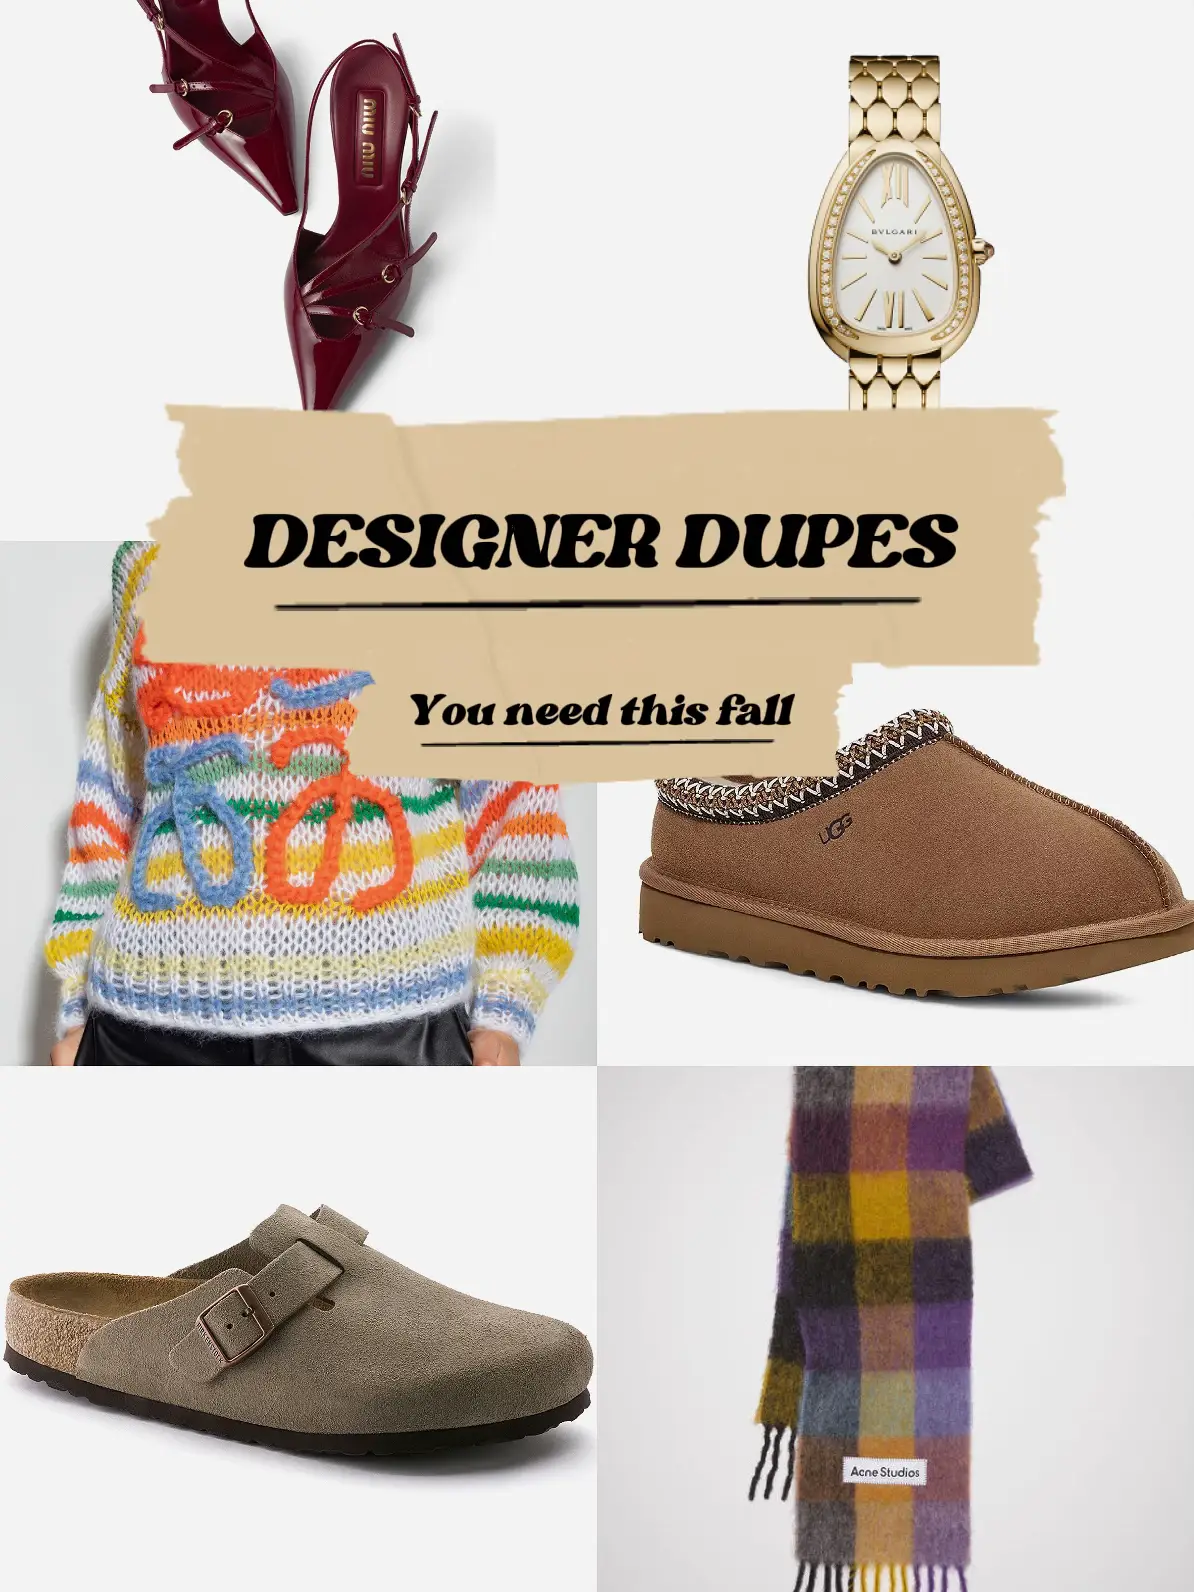 Get The Look For Less: Best  Designer Dupes - Blame it on Mei